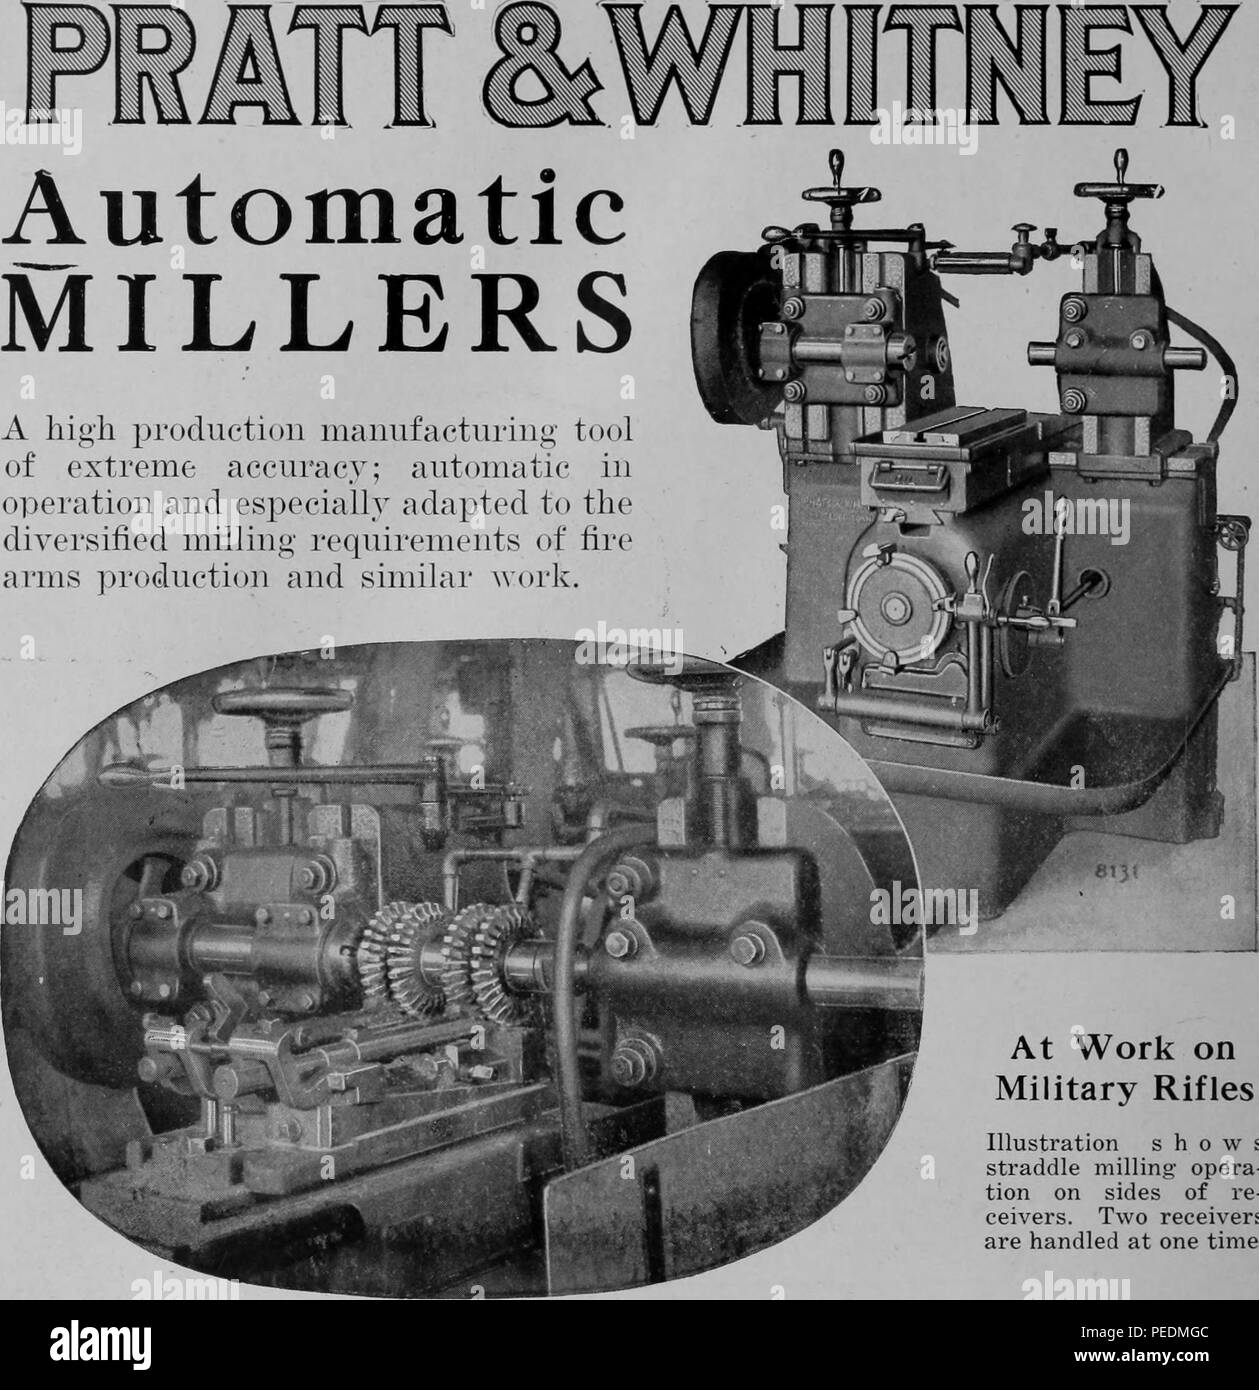 Black and white print advertisement, showing a full size and close-up inset image of a Pratt and Whitney brand Automatic Miller machine, designed to aid the manufacture of firearms, from the volume 'Canadian machinery and metalworking (July-December 1917)' published in Toronto by MacLean-Hunter, 1917. Courtesy Internet Archive. () Stock Photo